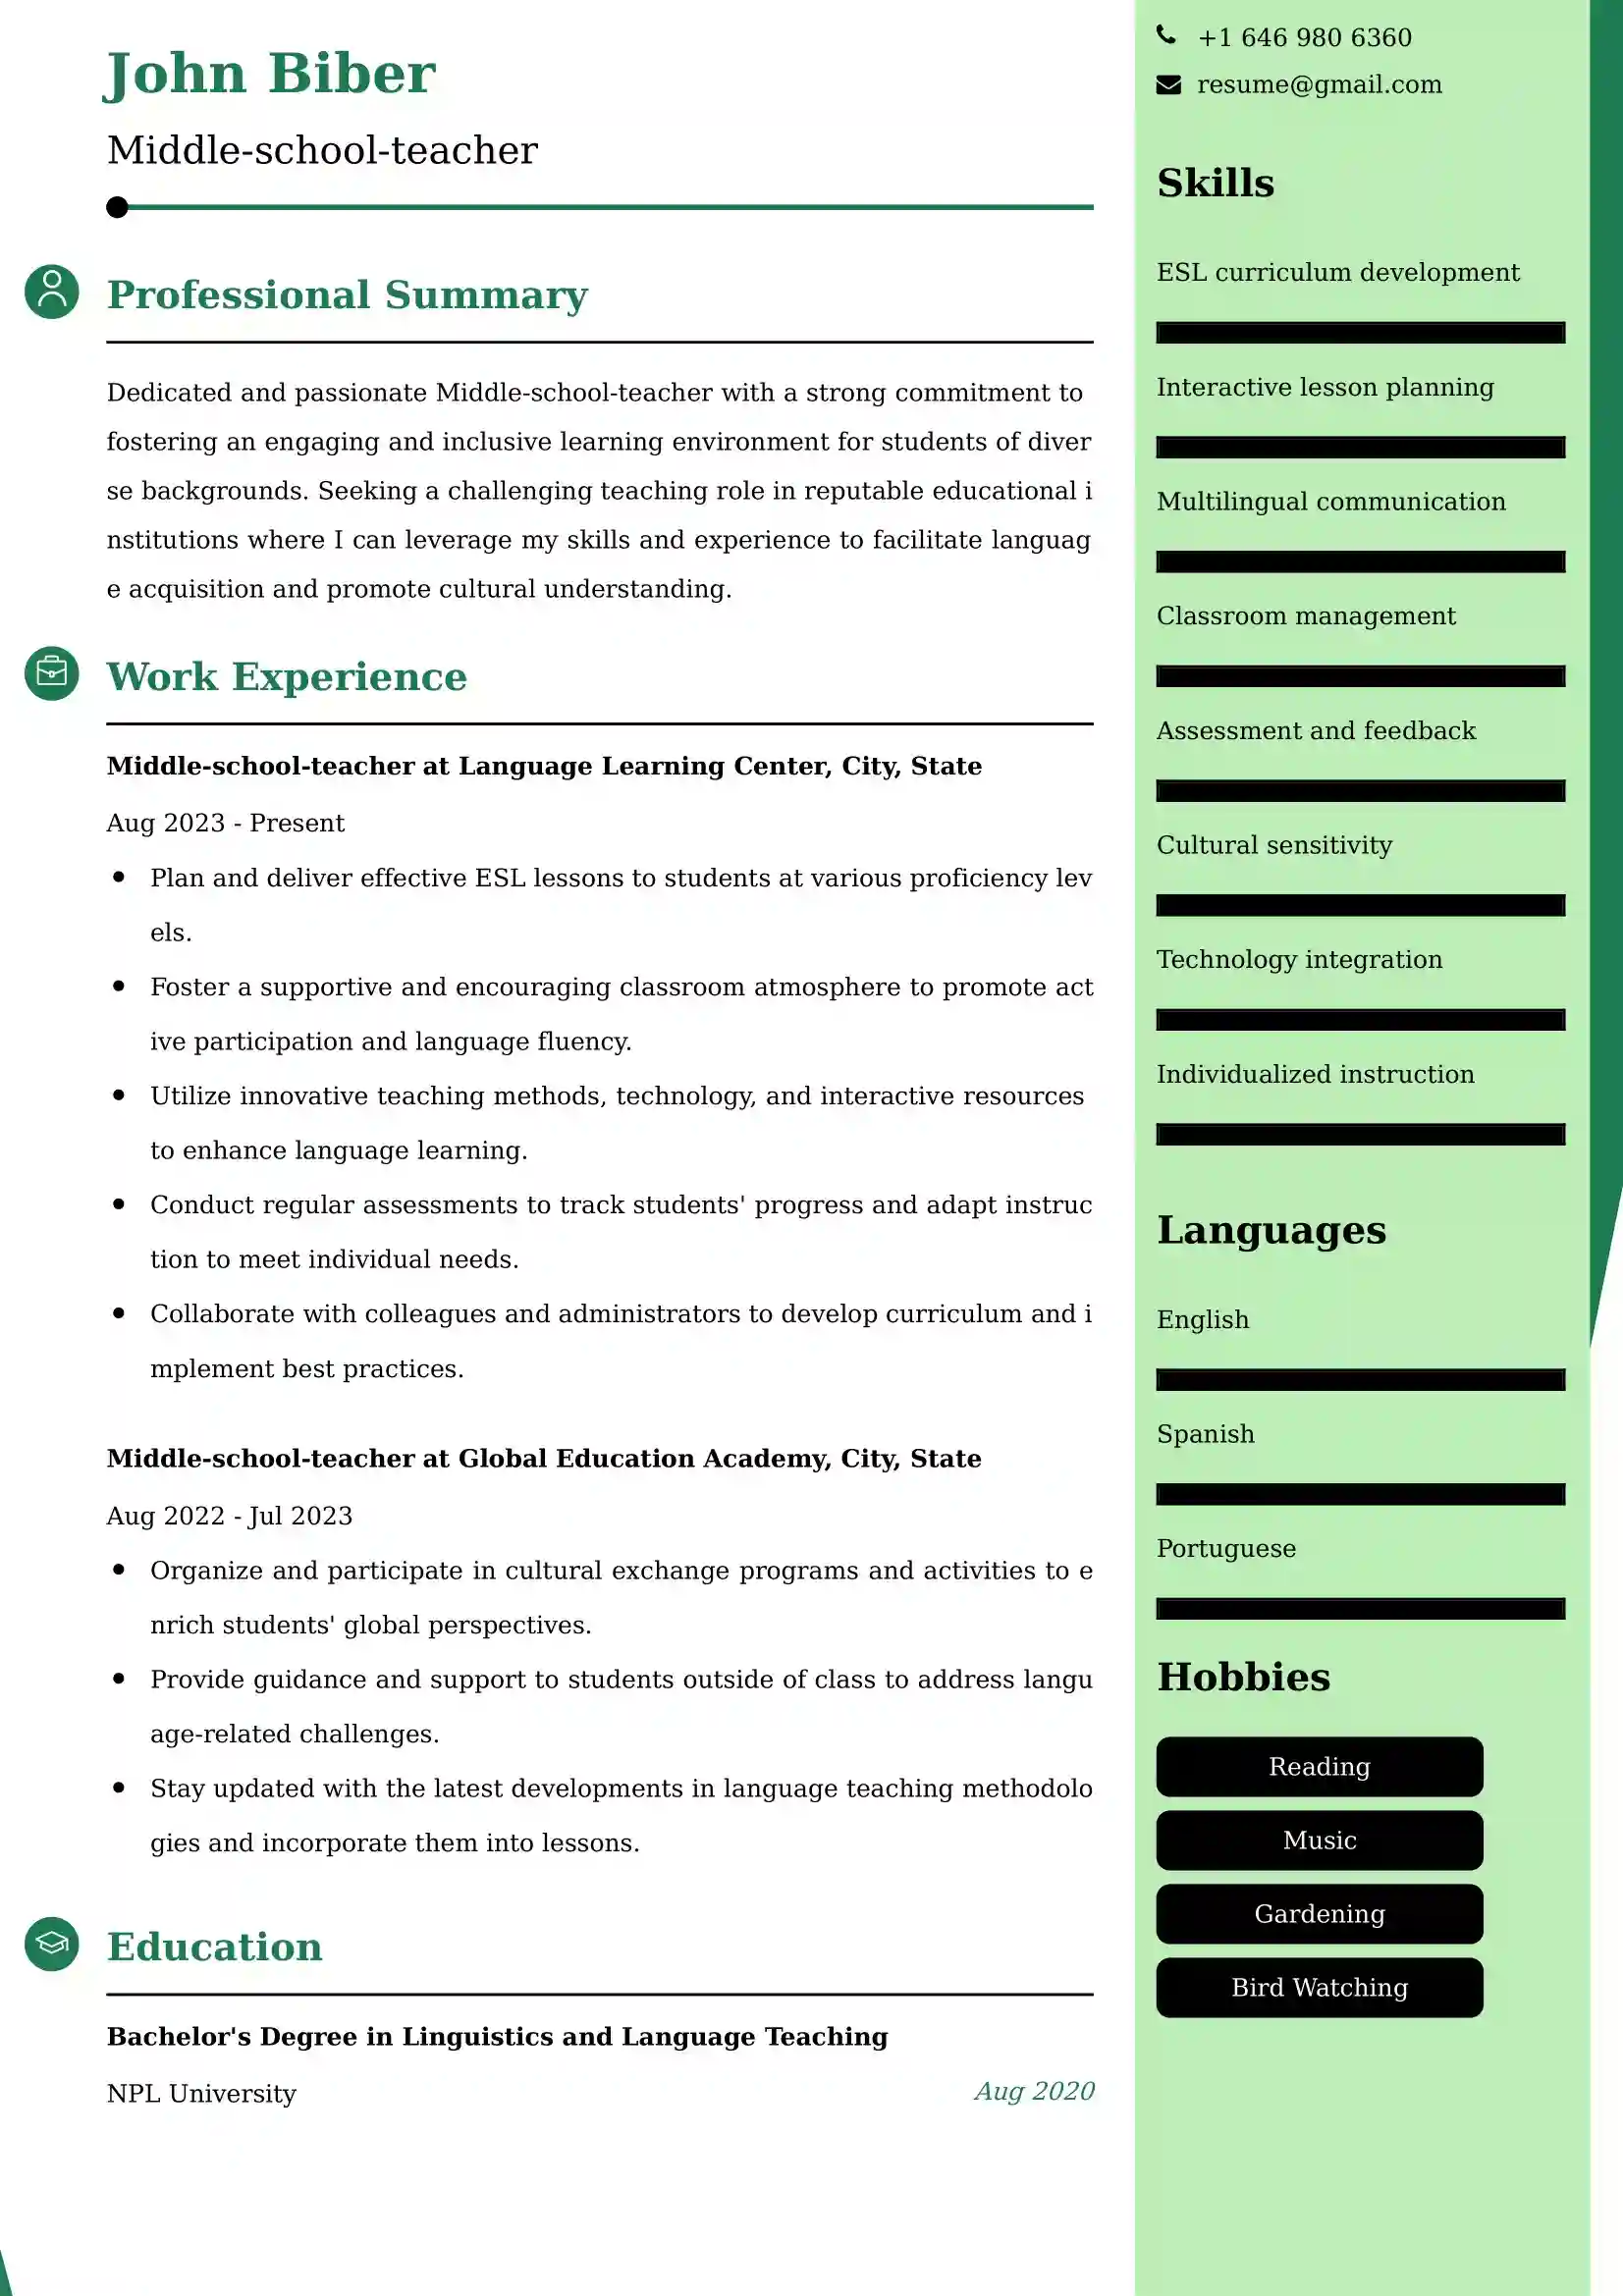 Middle School Teacher Resume Examples - UK Format, Latest Template.